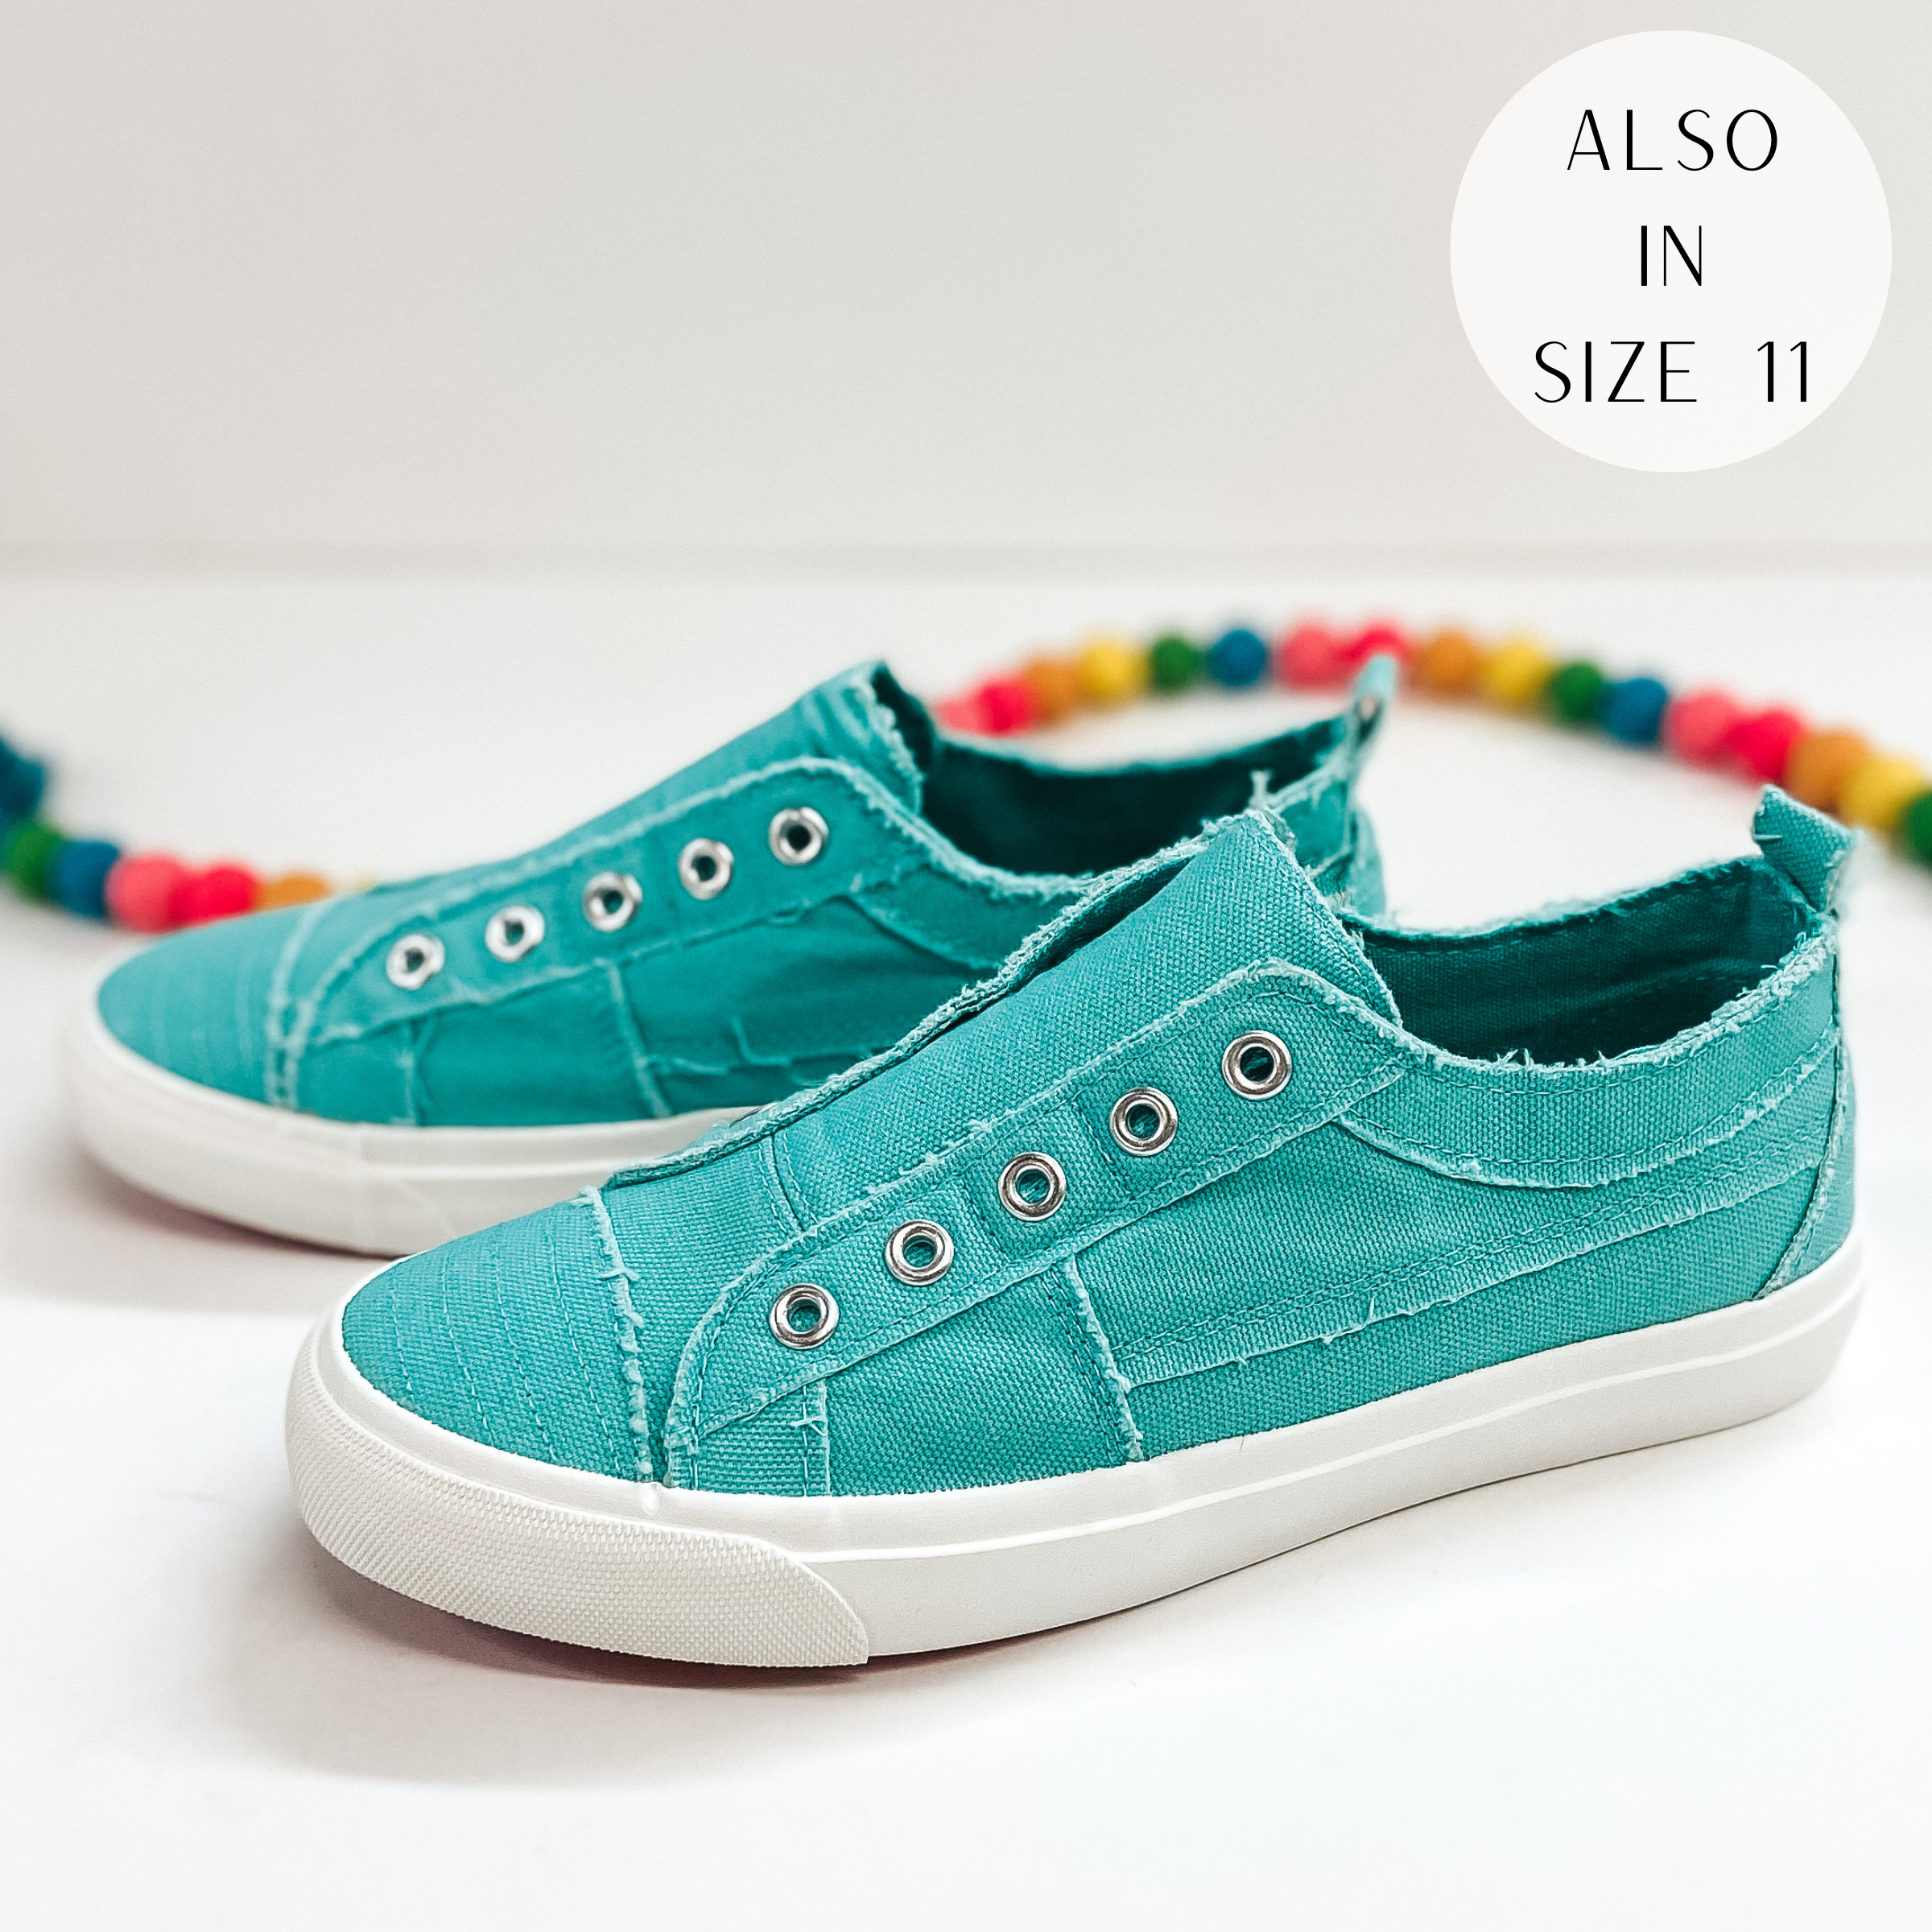 A pair of aqua blue sneakers that do not have laces. Pictured on white background with colorful beads.